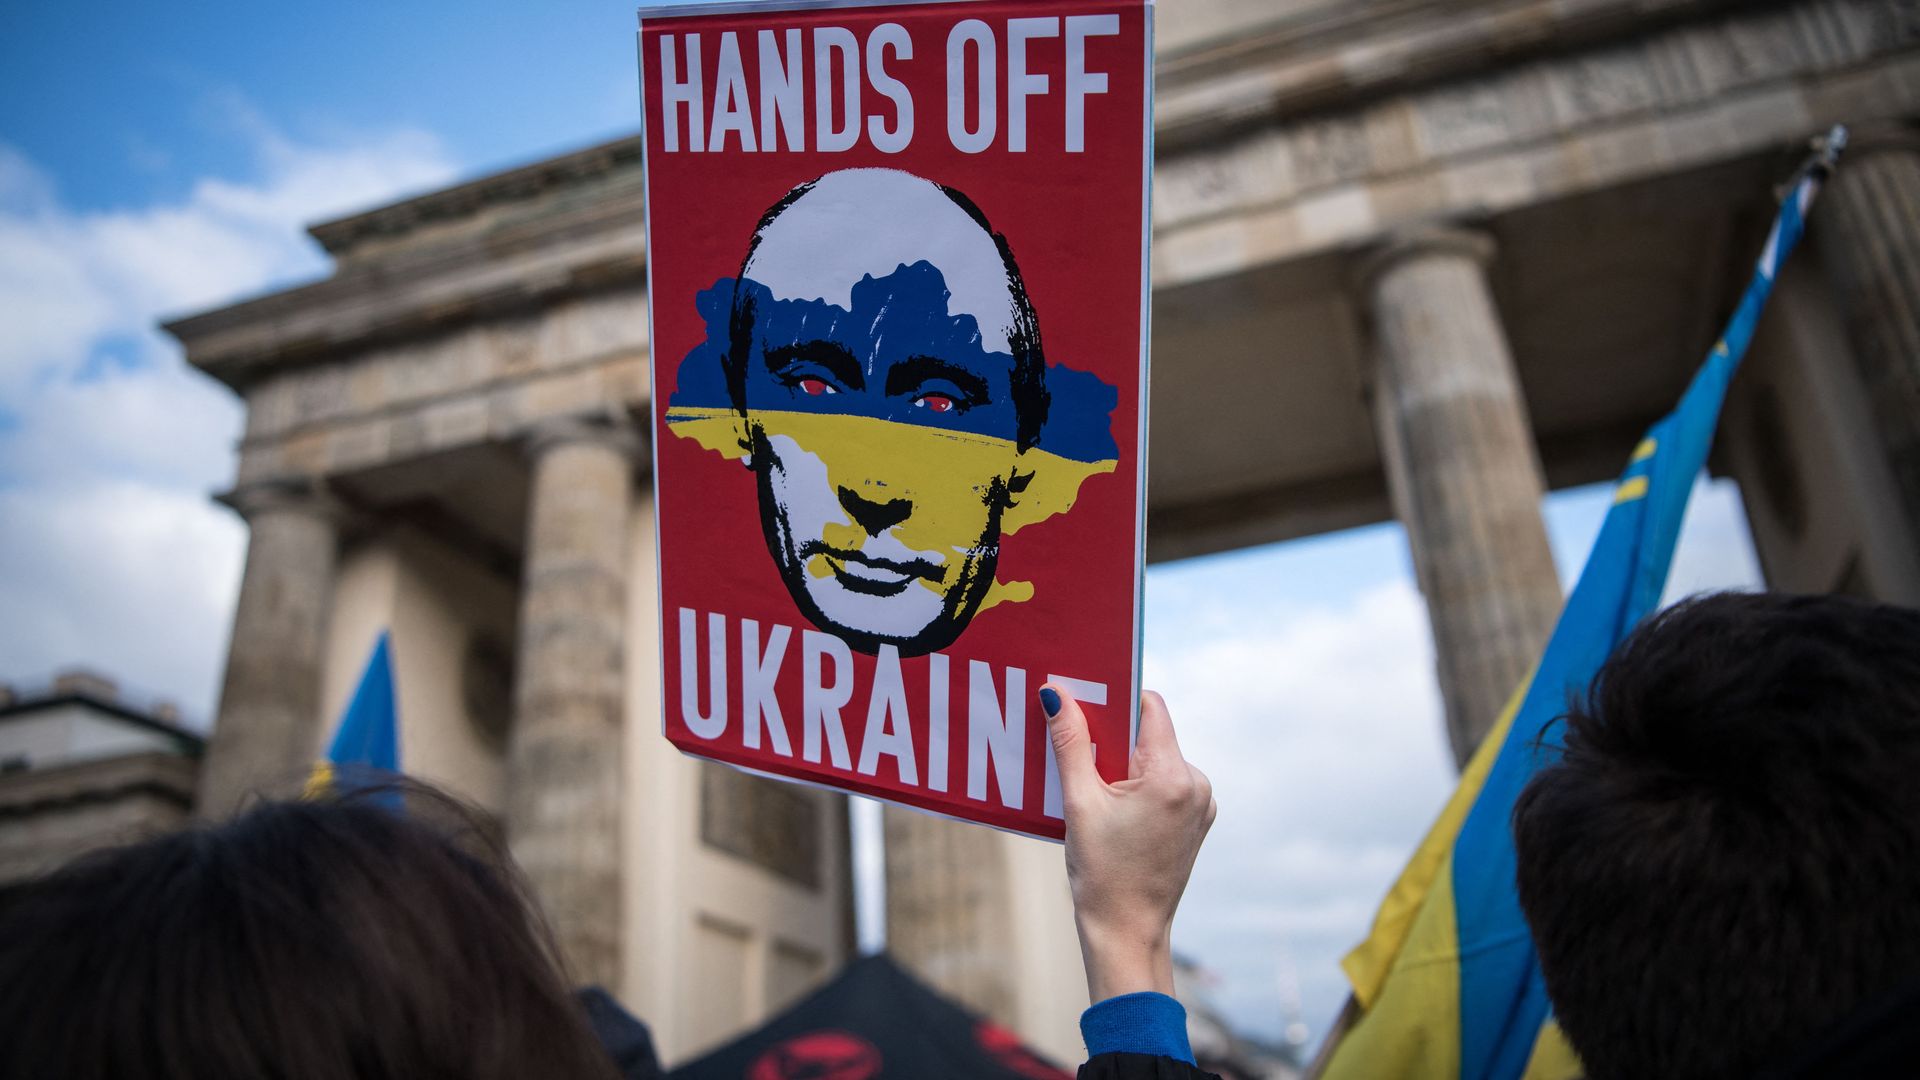  A protester holds up a poster reading "Hands Off Ukraine" and depicting the face of Russian President Vladimir Putin during a demonstration in Berlin on Feb. 19.